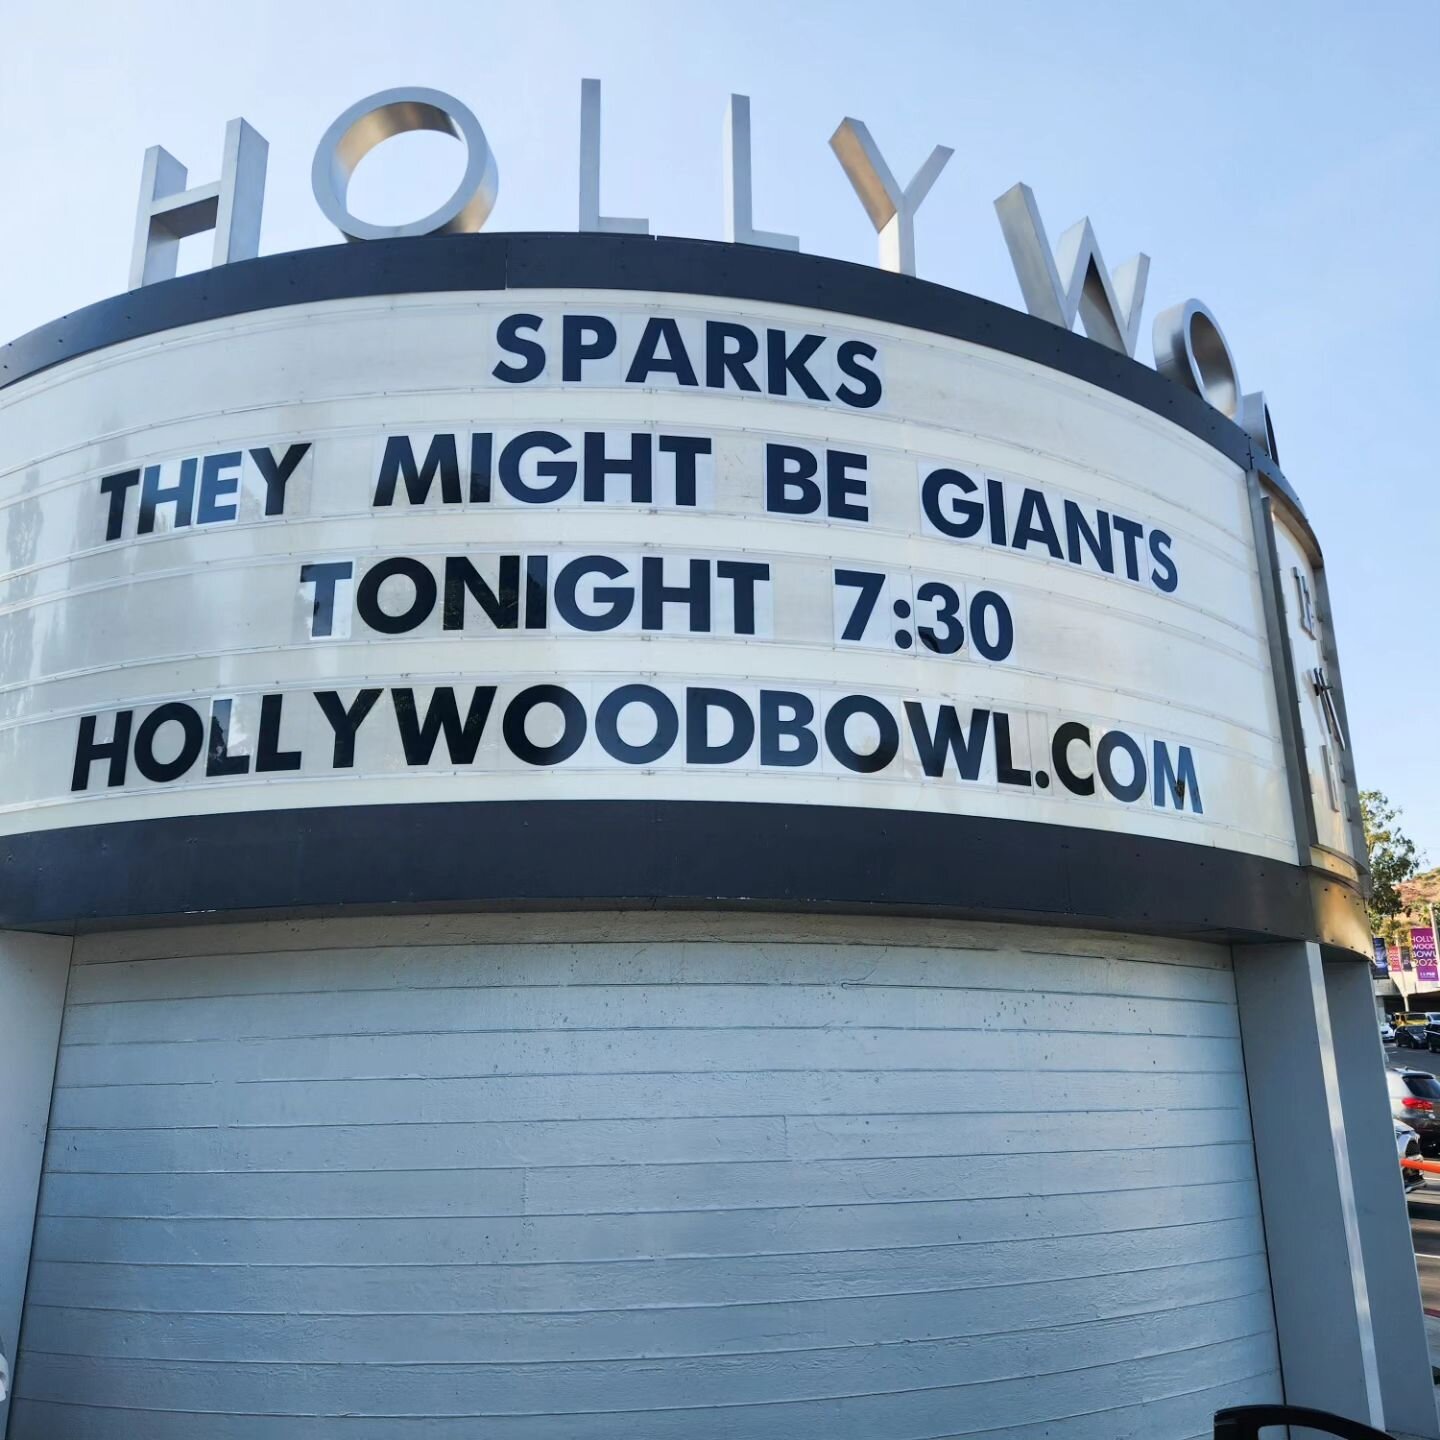 I had an incredible night at the Hollywood Bowl seeing Sparks with They Might Be Giants last night. It was so great hearing the horns with TMBG! And it was an emotional show for Sparks as they wrapped up their tour, and director Edgar Wright showed u